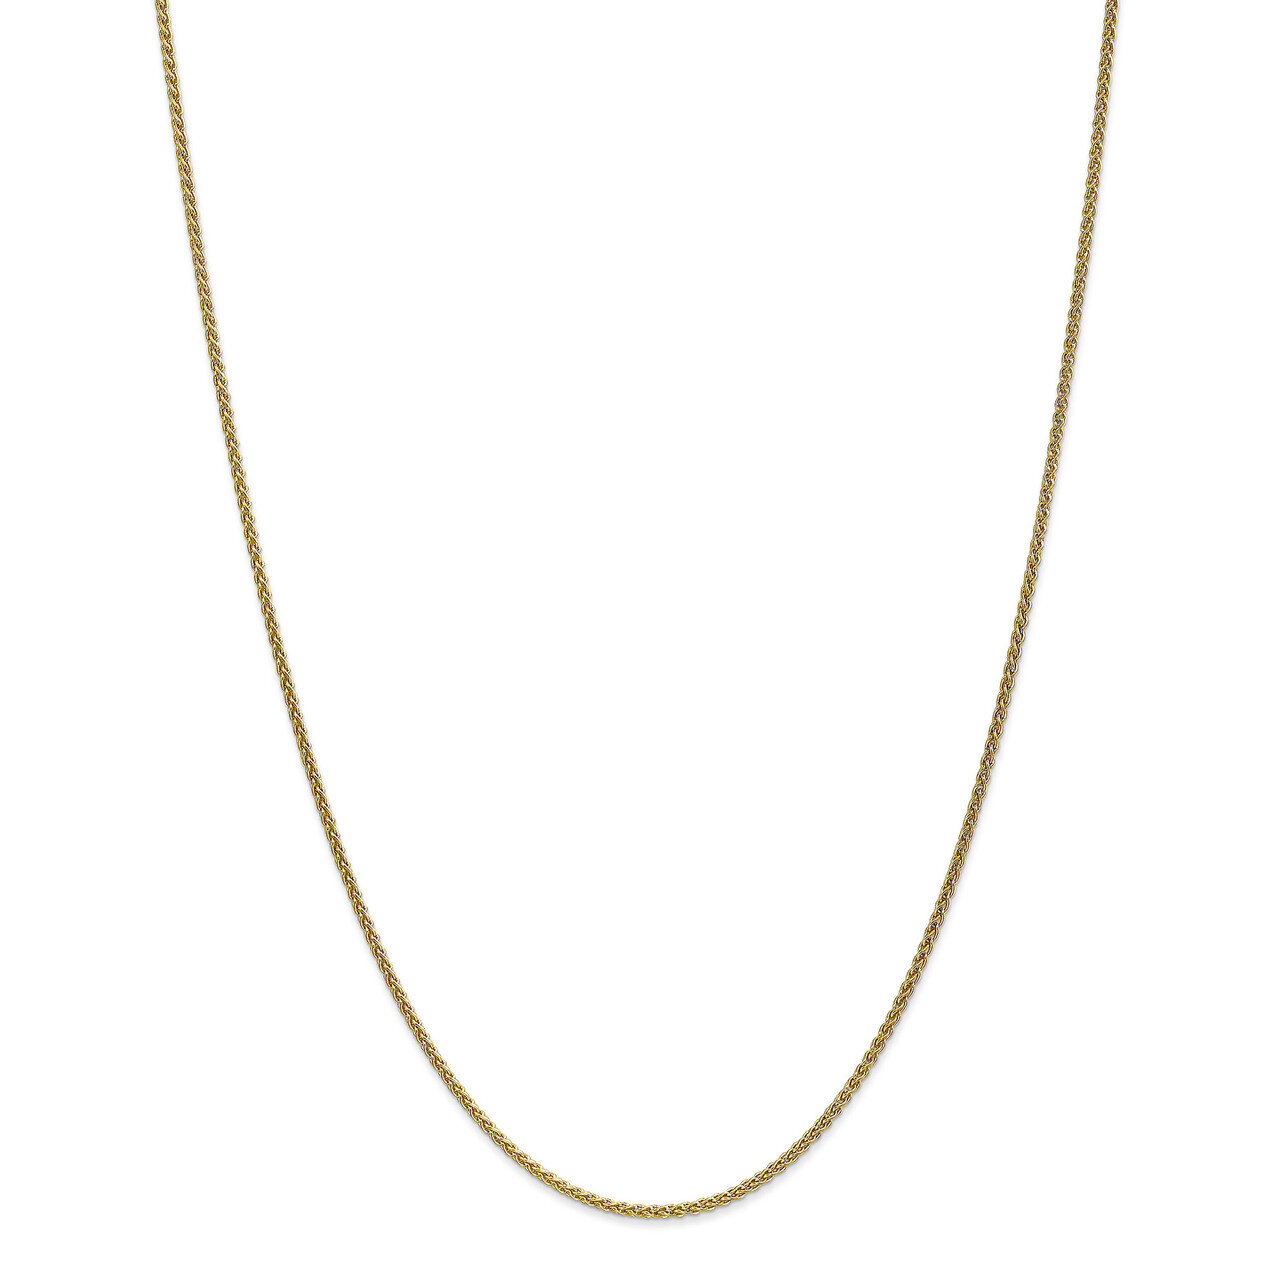 20 Inch 1.65mm Solid Polished Spiga Chain 10k Gold 10SPG040-20